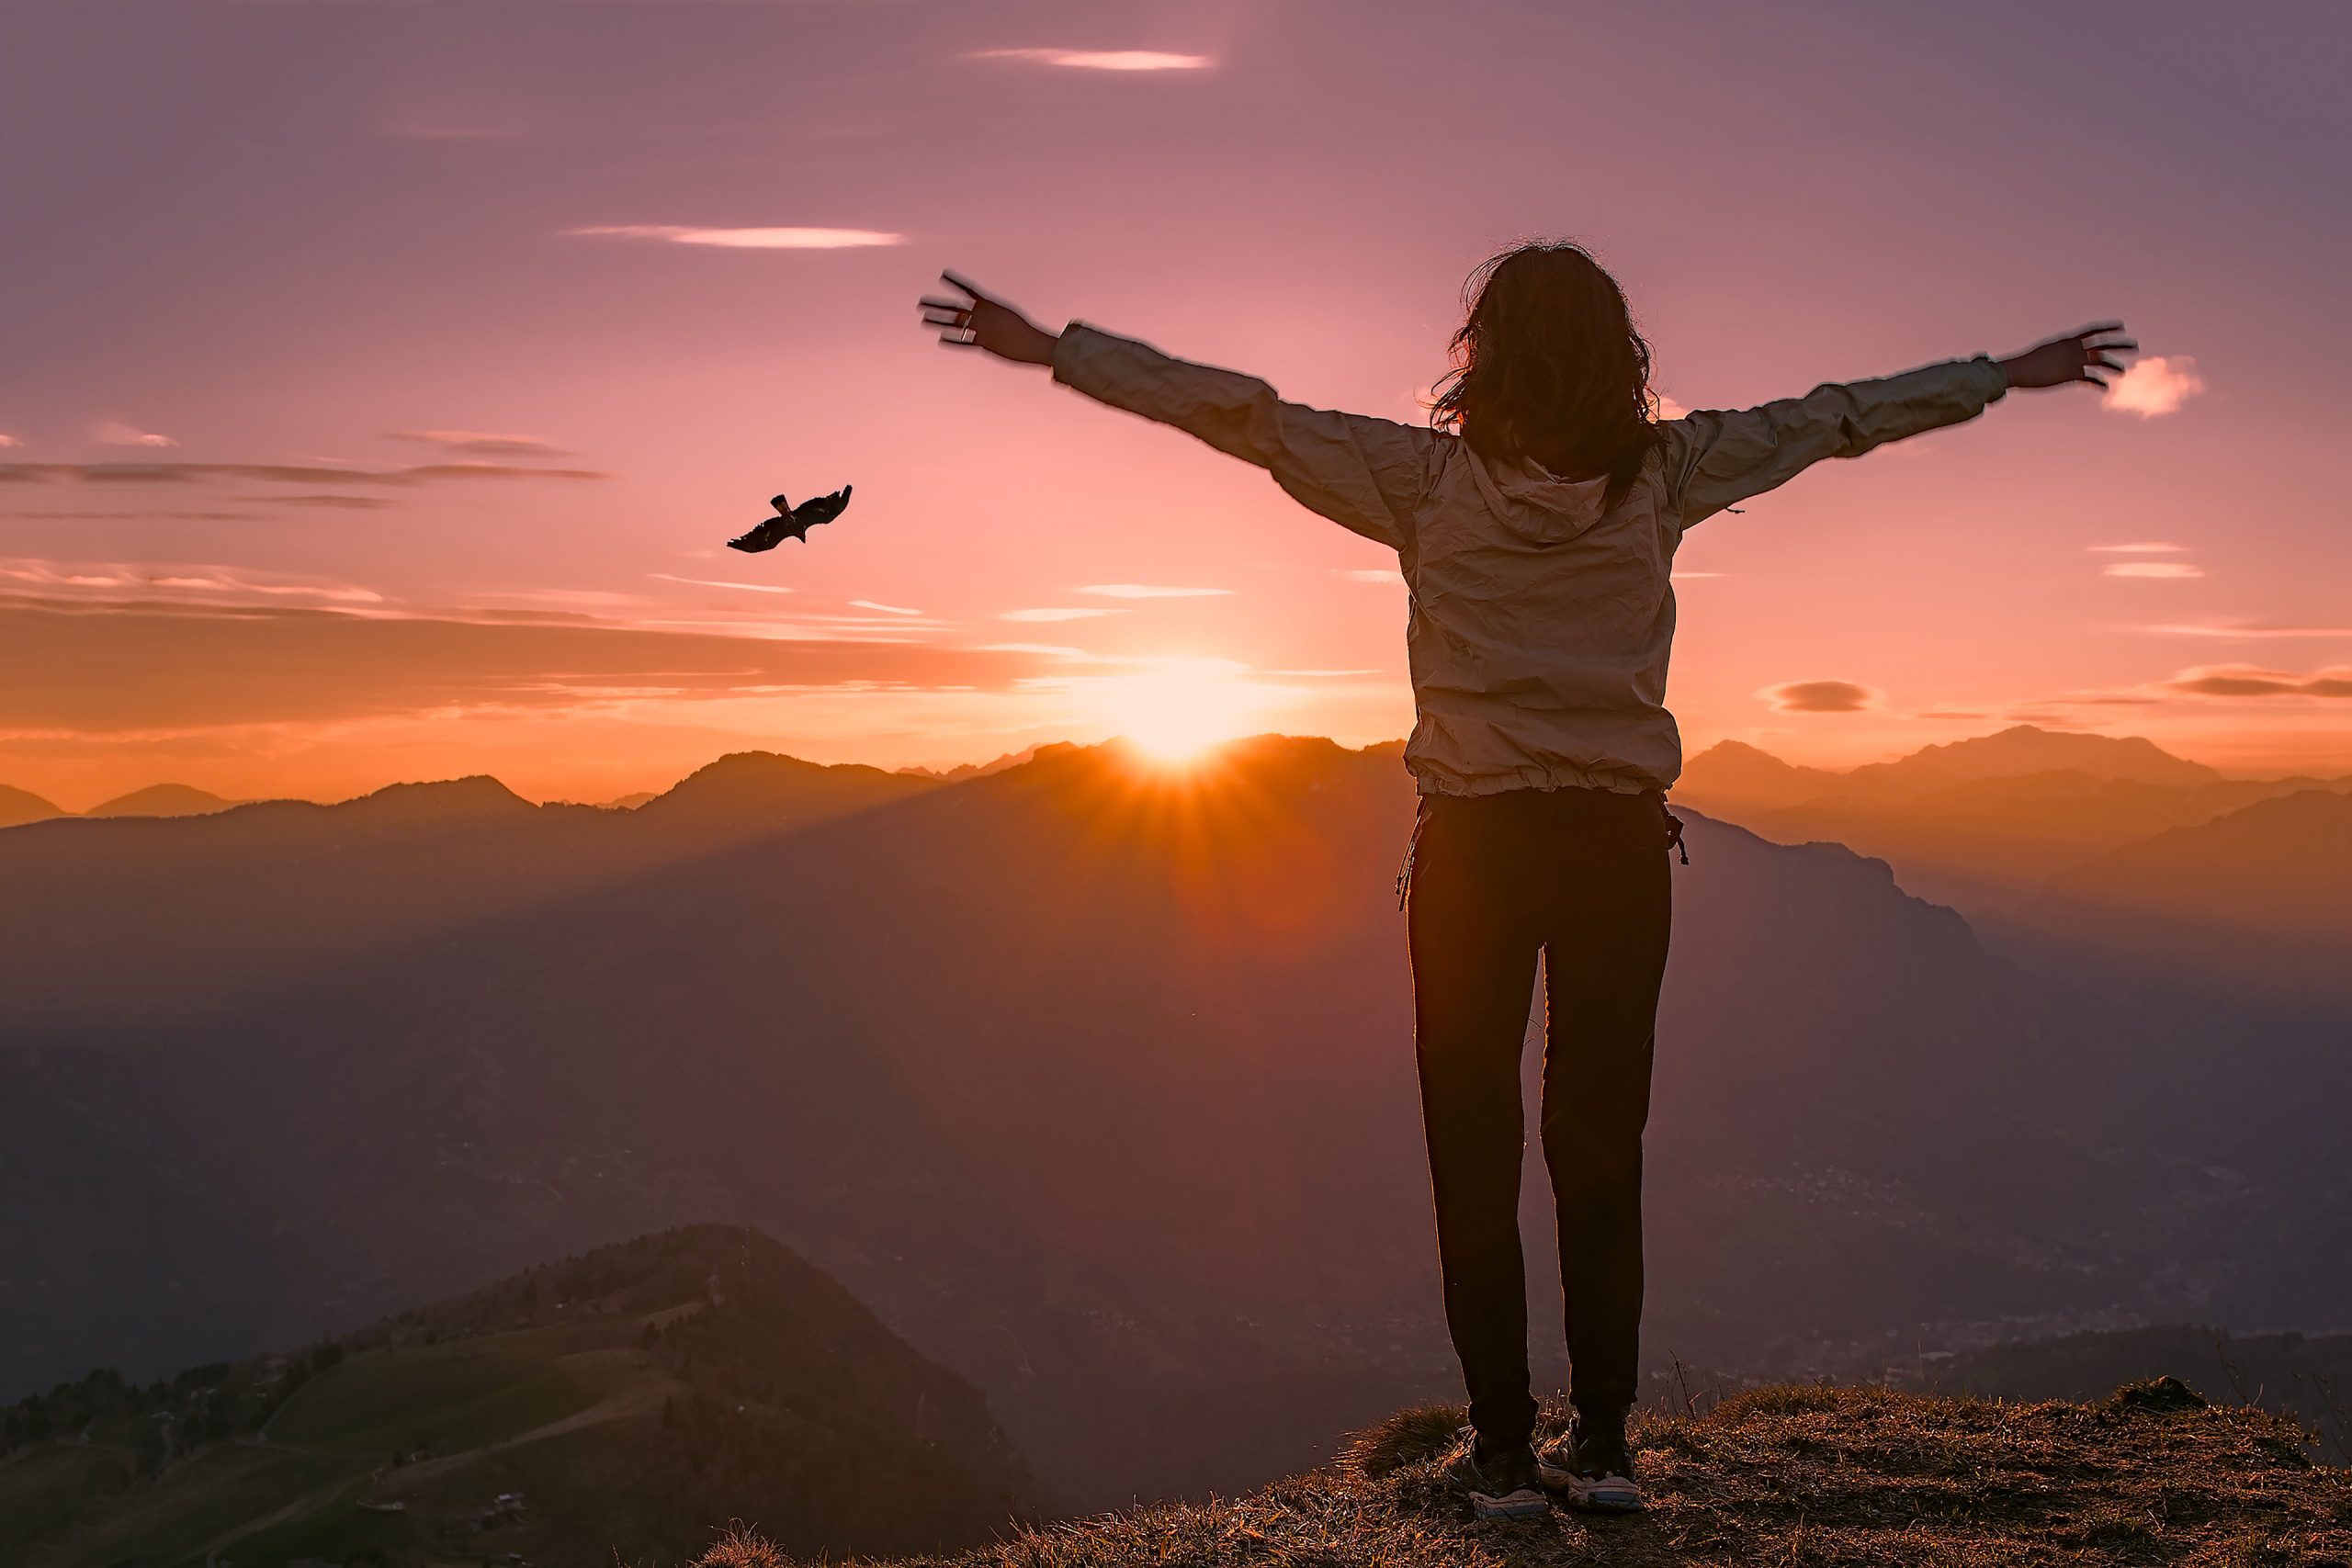 Silhouette of person with outstretched arms on top of a mountain